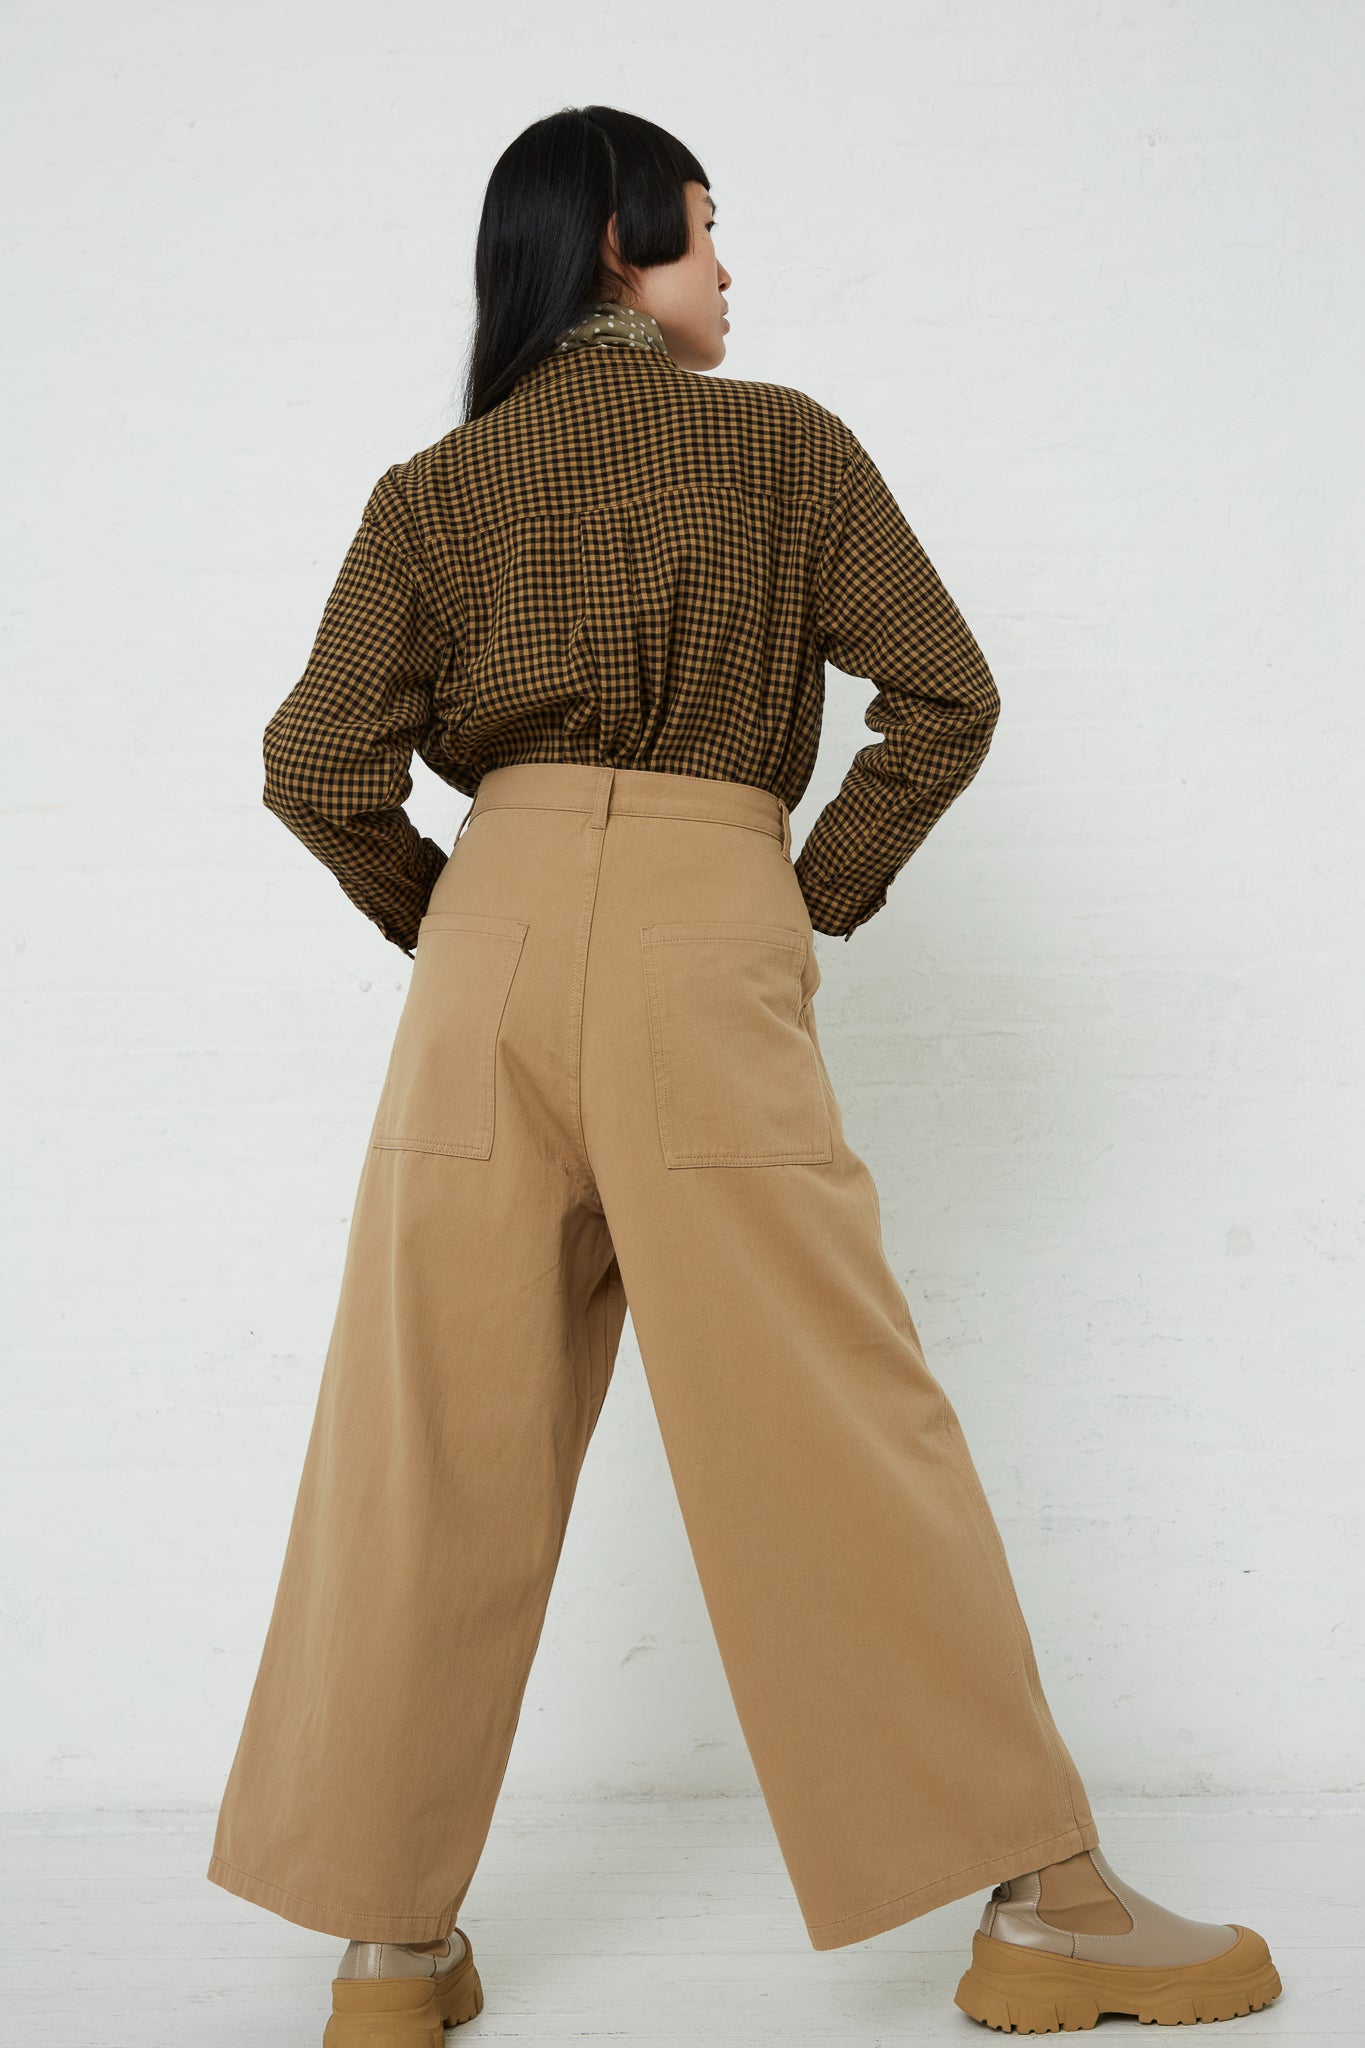 The back view of a woman wearing Ichi's Cotton Pant in Beige wide leg pants.